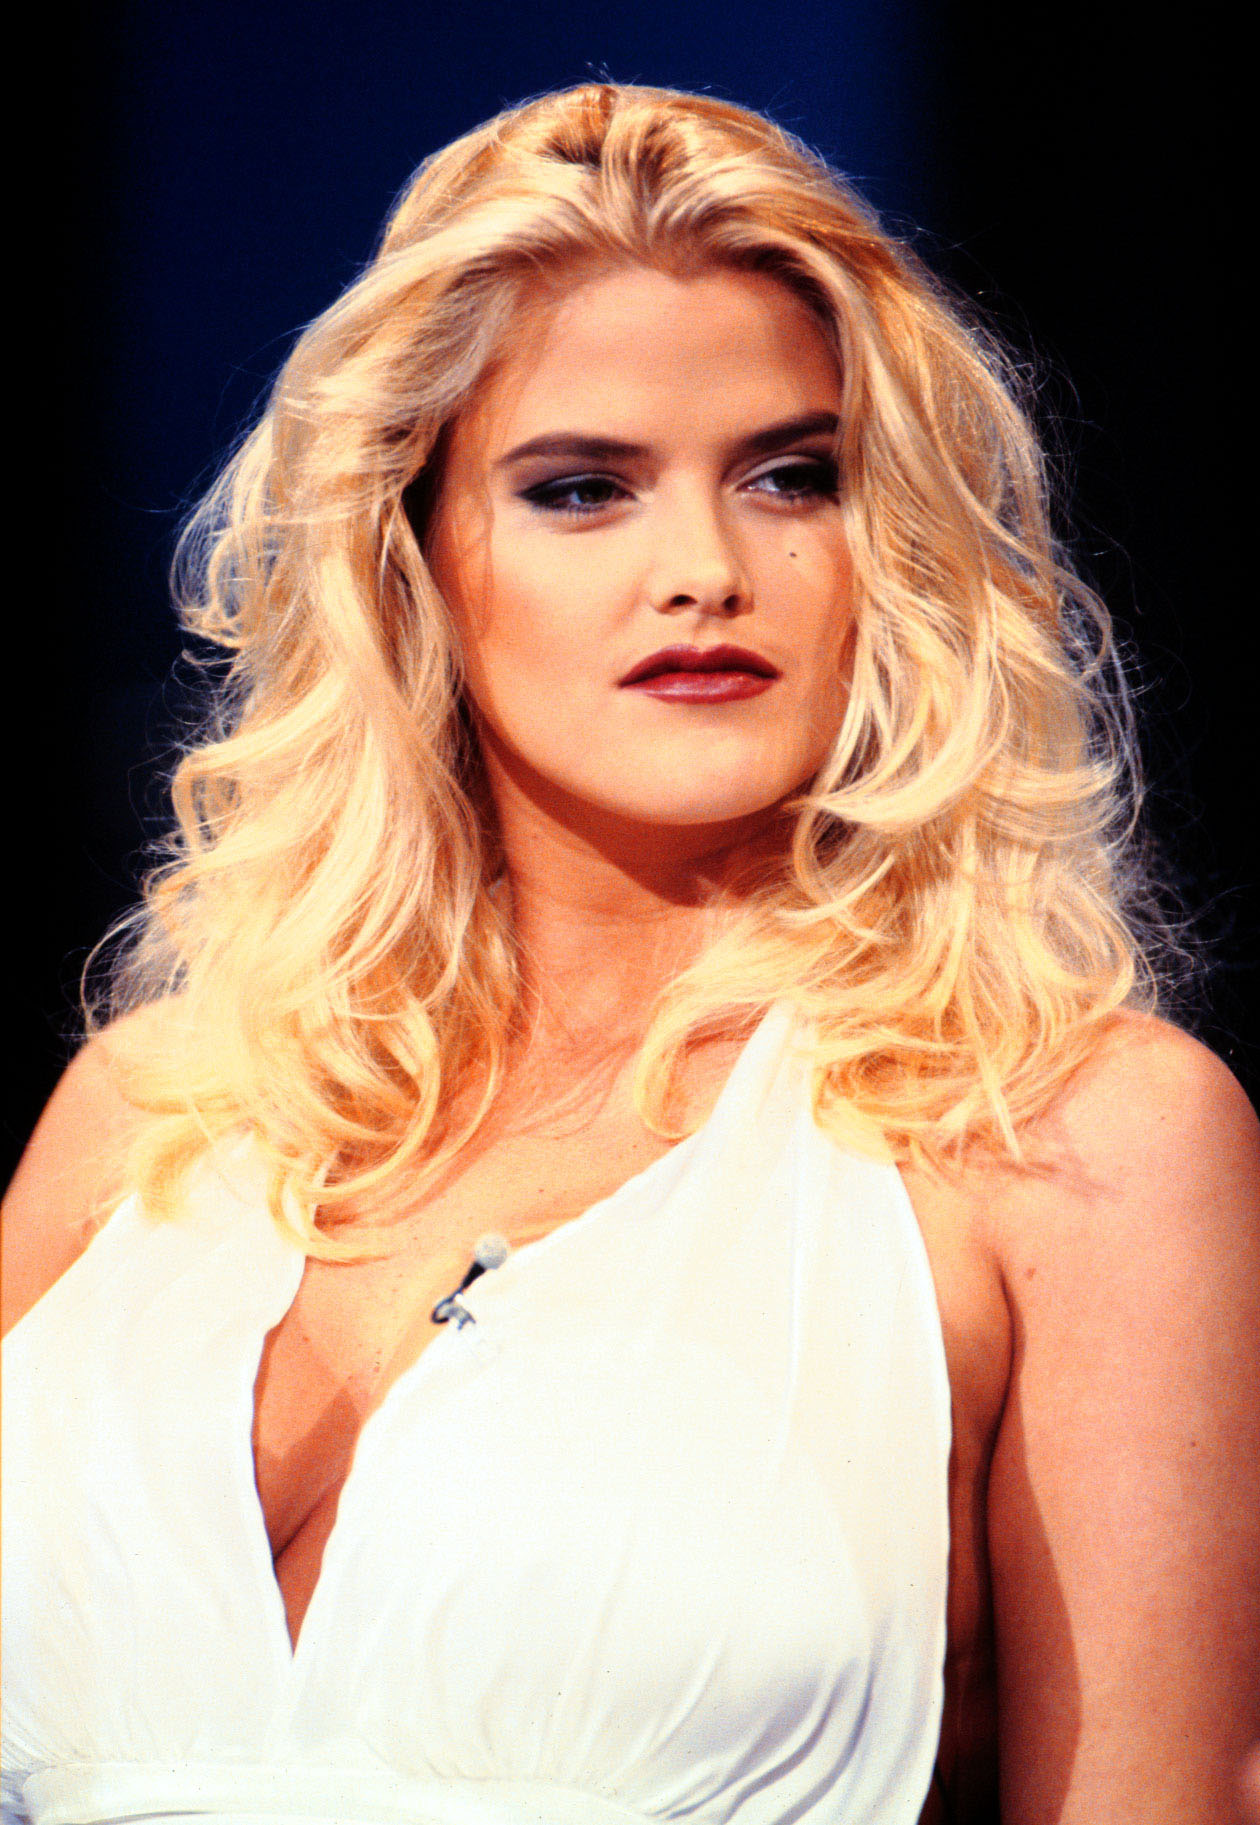 Anna Nicole Smith posing for a portrait, circa 1998 | Source: Getty Images